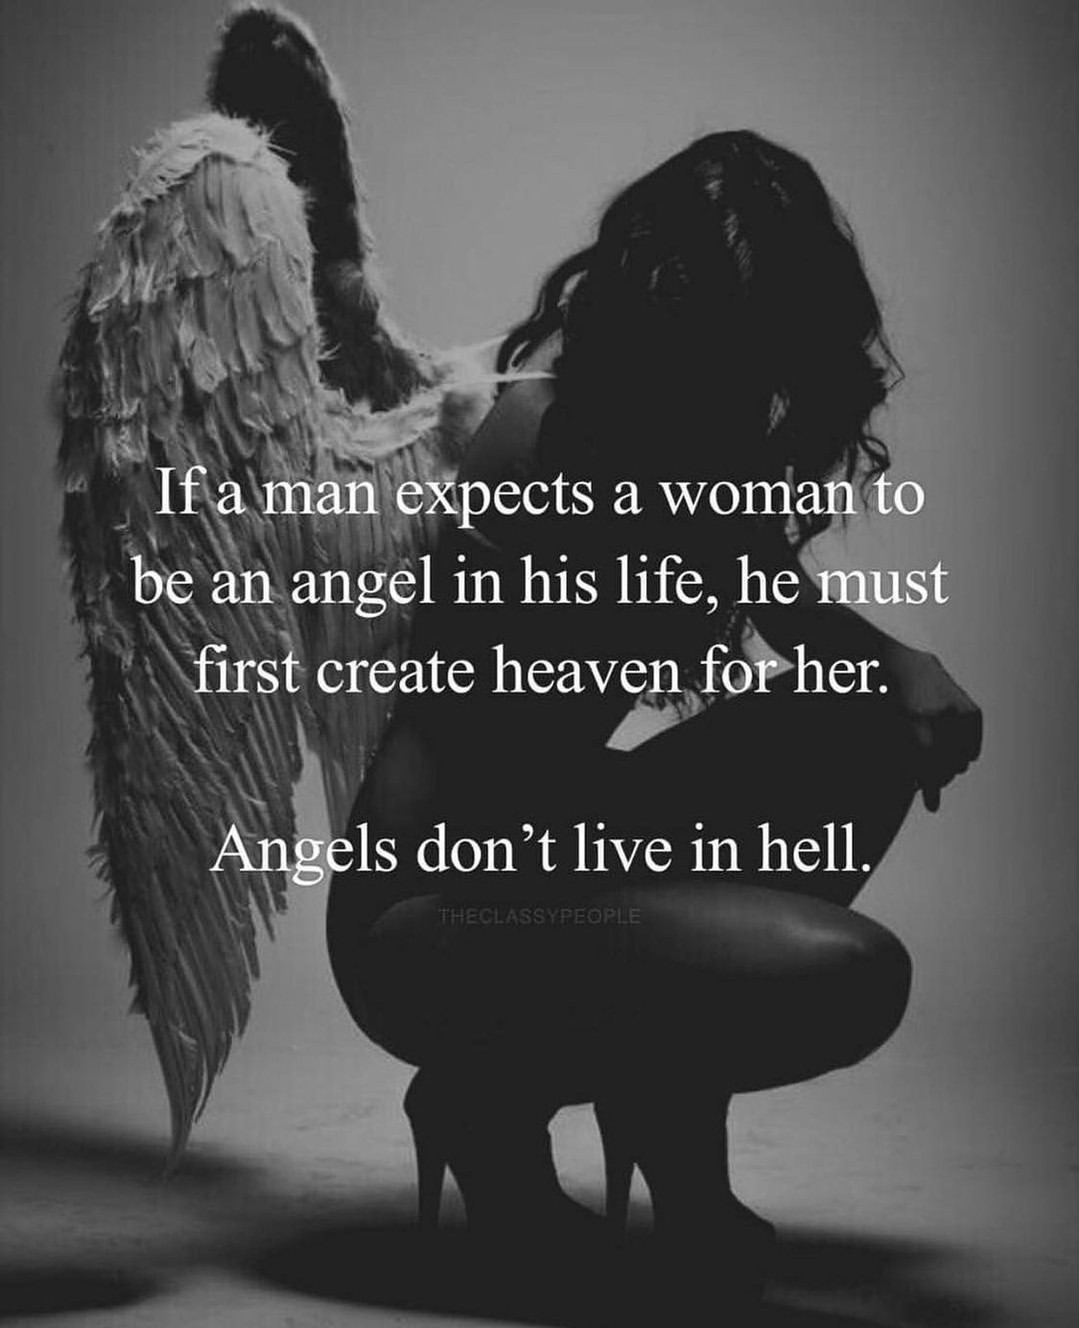 I Man Expects A Woman To Be An Angel In His Life He Must First Create Heaven For Her Angels